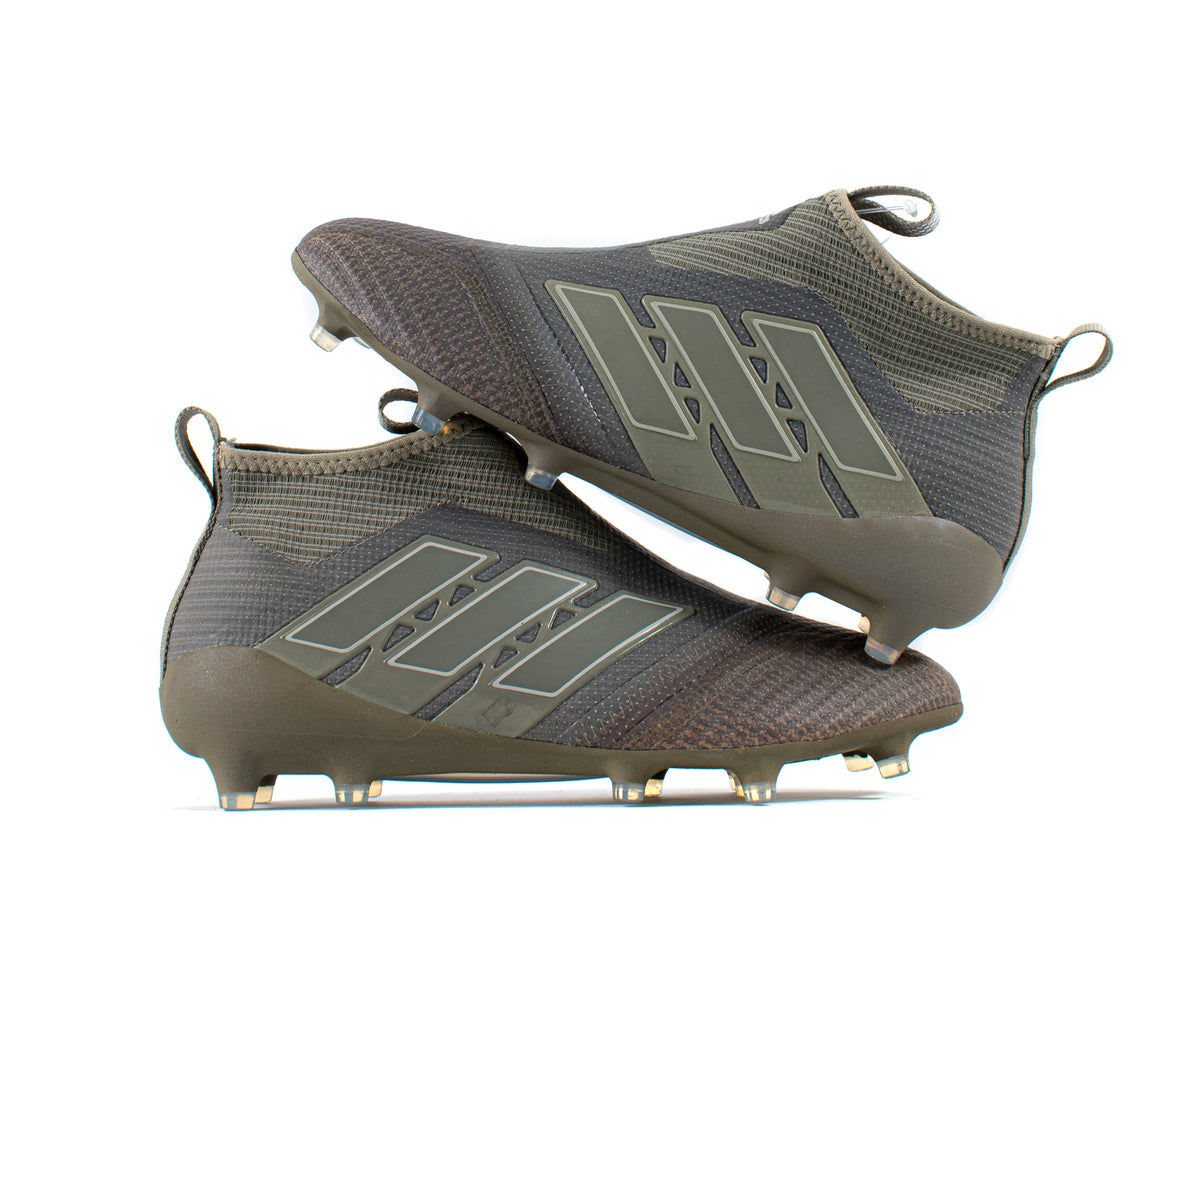 Ace 17+ PureControl FG – Classic Soccer Cleats